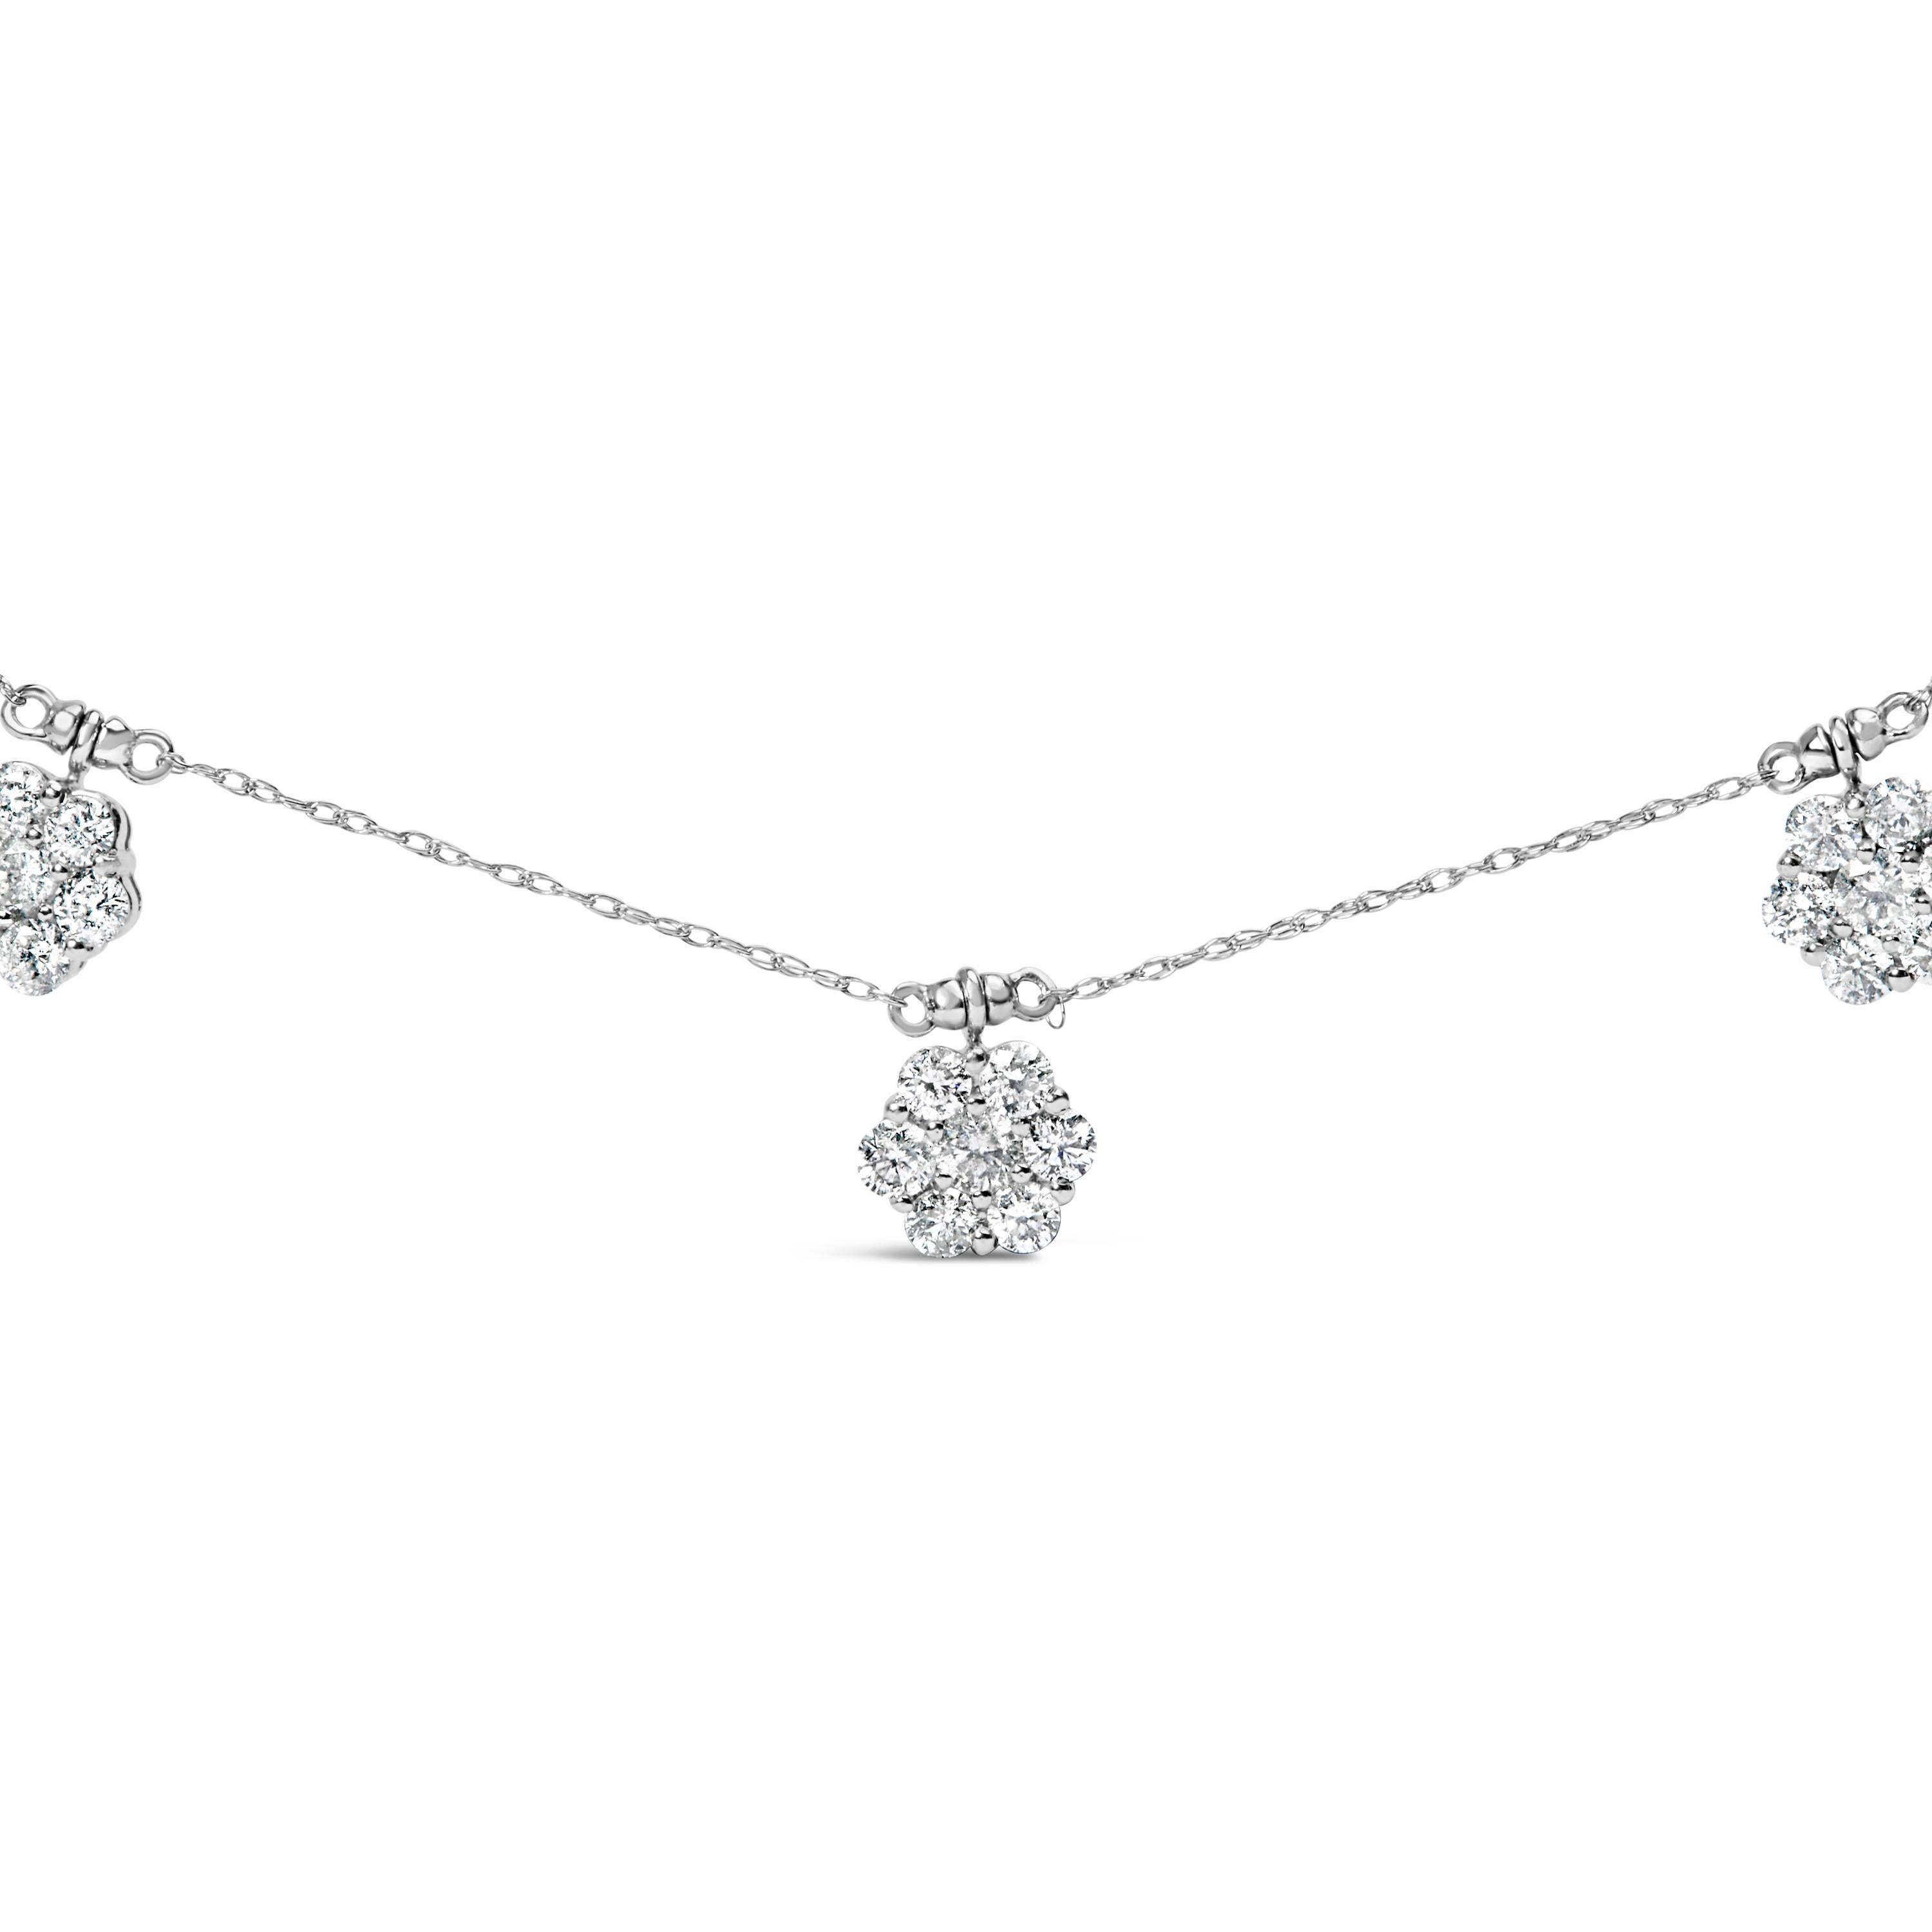 Bring a touch of timeless elegance to your jewelry collection with this exquisite flower station necklace. Crafted from 10K white gold, this stunning piece features 49 round-cut diamonds, totaling 3.0 cttw. These natural diamonds boast a striking